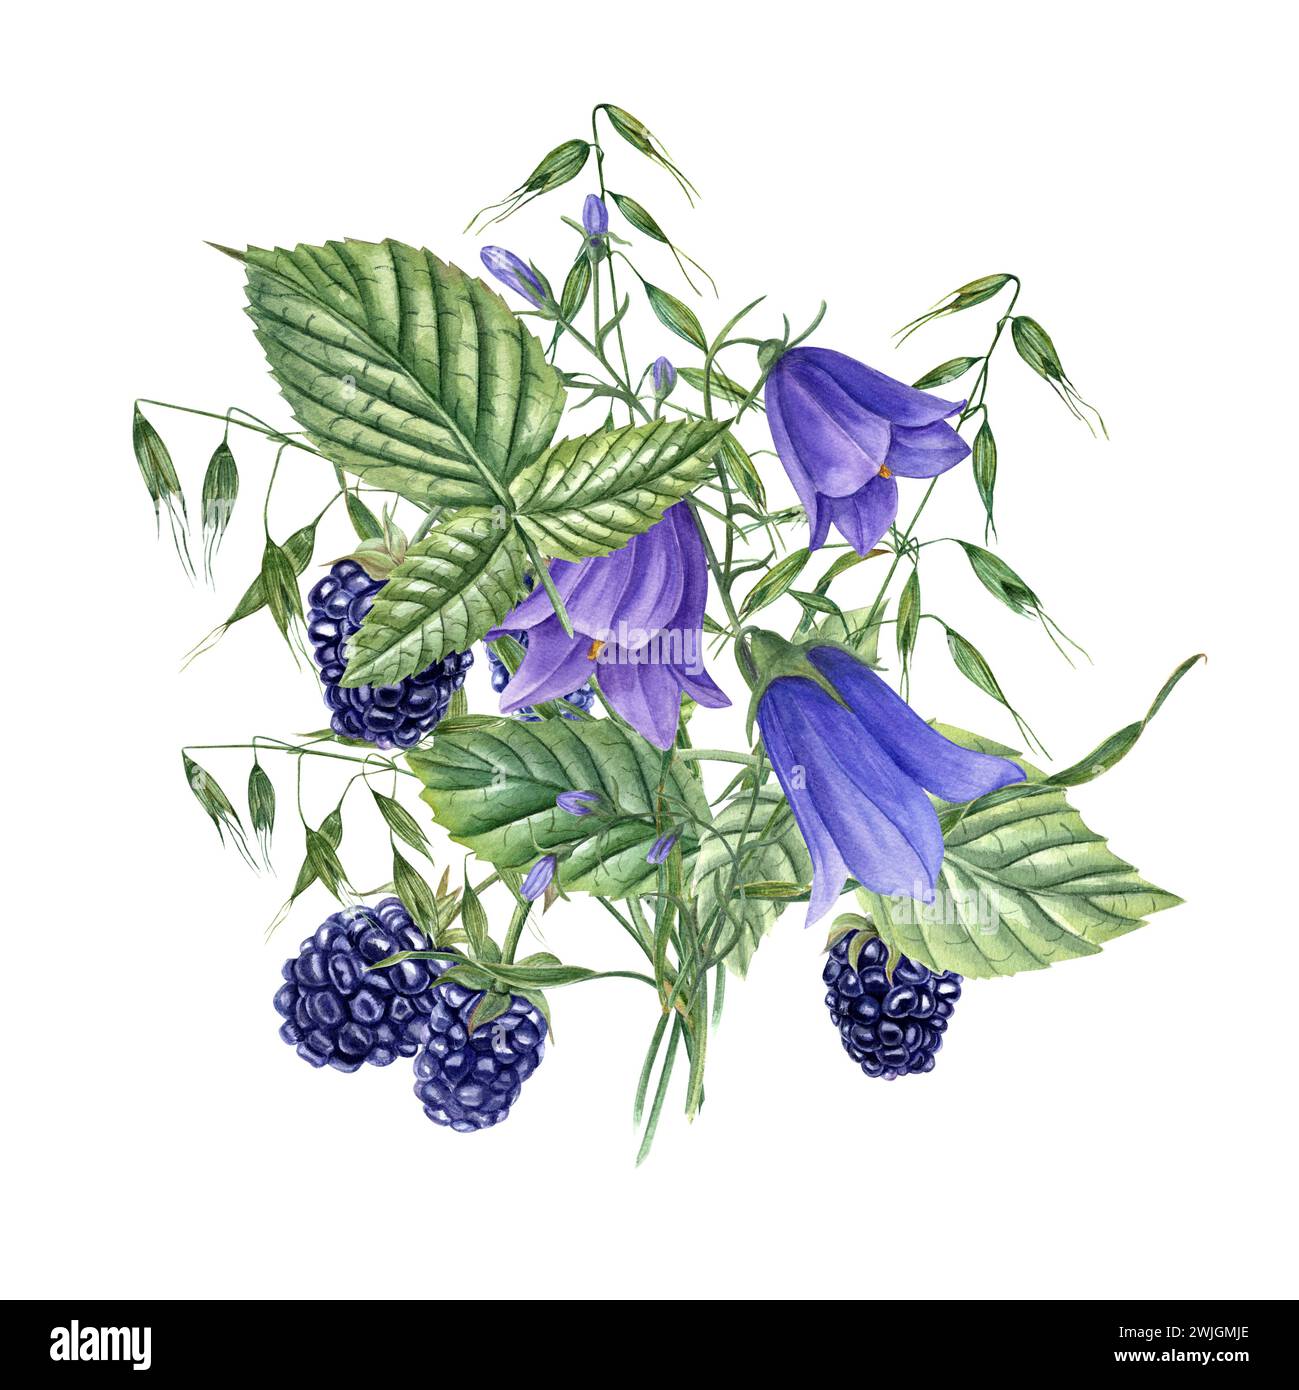 Bouquet with Blackberries, blue Harebells, wild oats. Meadow plants and forest berries. Campanula, avena. Dewberry, bramble. Watercolor illustration Stock Photo